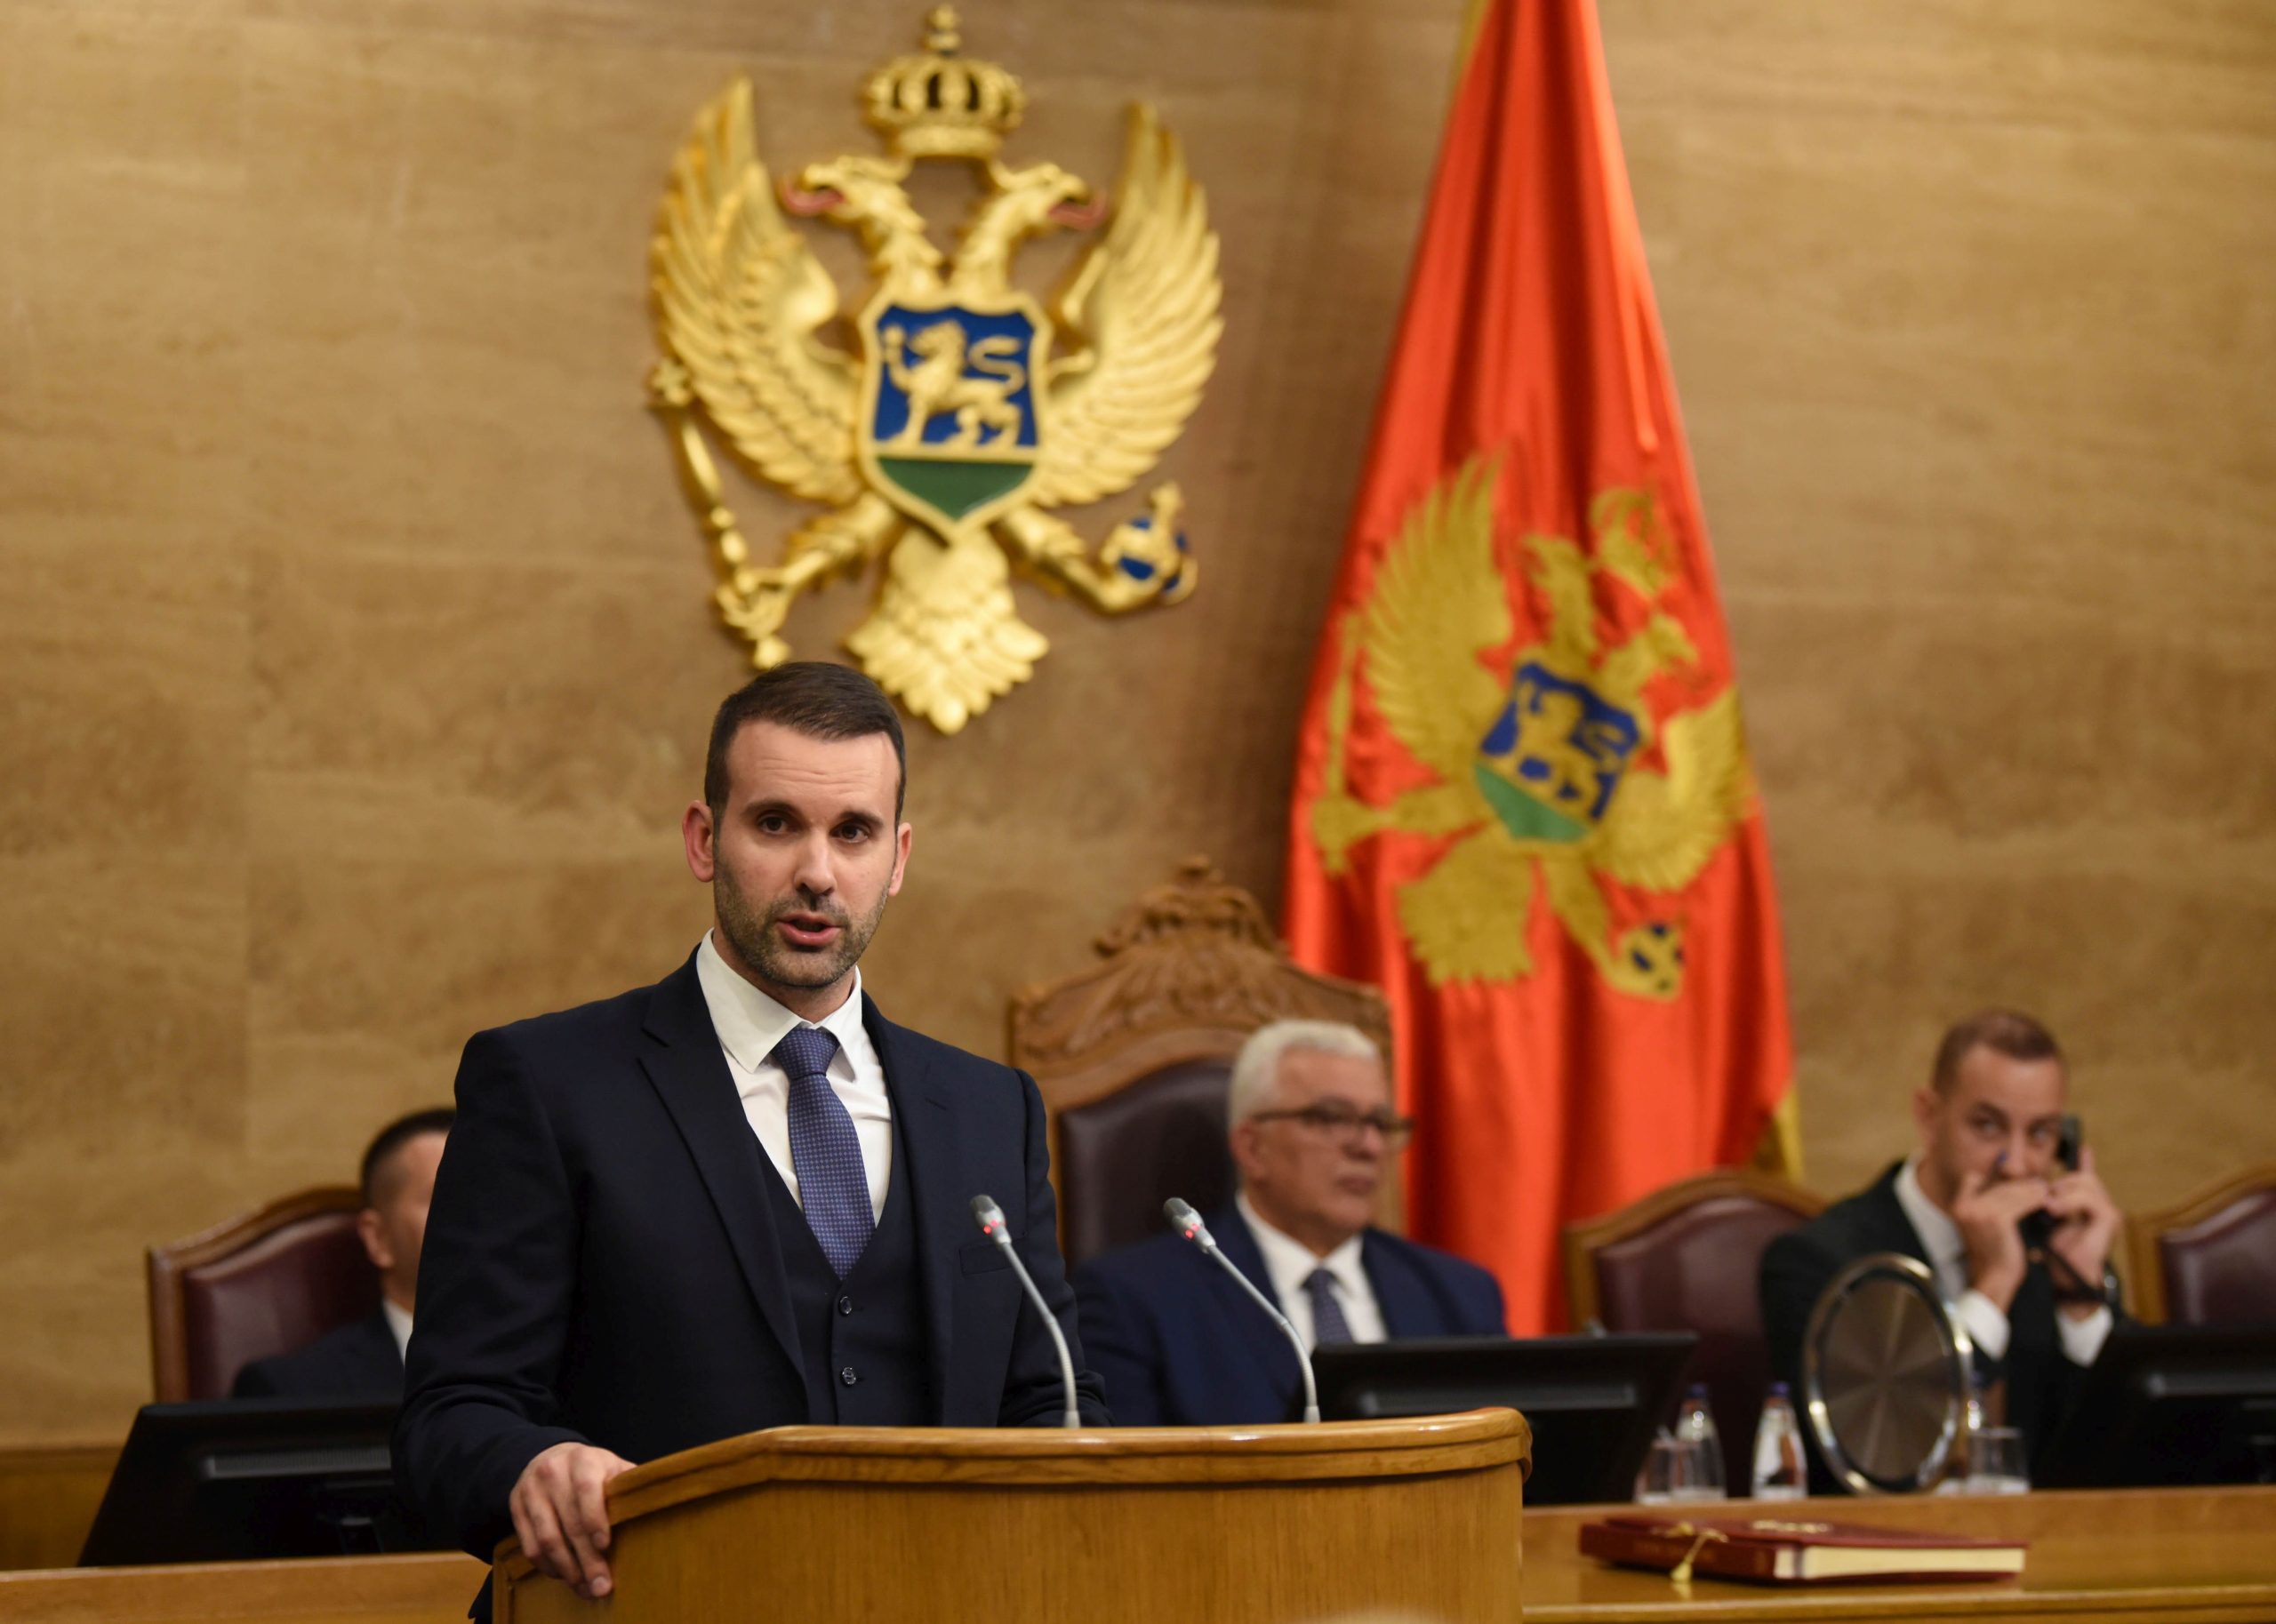 epa10949726 Montenegro's Prime Minister designate Milojko Spajic addresses the Parliament in Podgorica, Montenegro, 30 October 2023. Spajic announced his candidates for ministerial positions. Europe Now party President and Prime Minister designate Milojko Spajic managed to form a coalition government after the snap parliamentary elections on 11 June 2023.  EPA/BORIS PEJOVIC